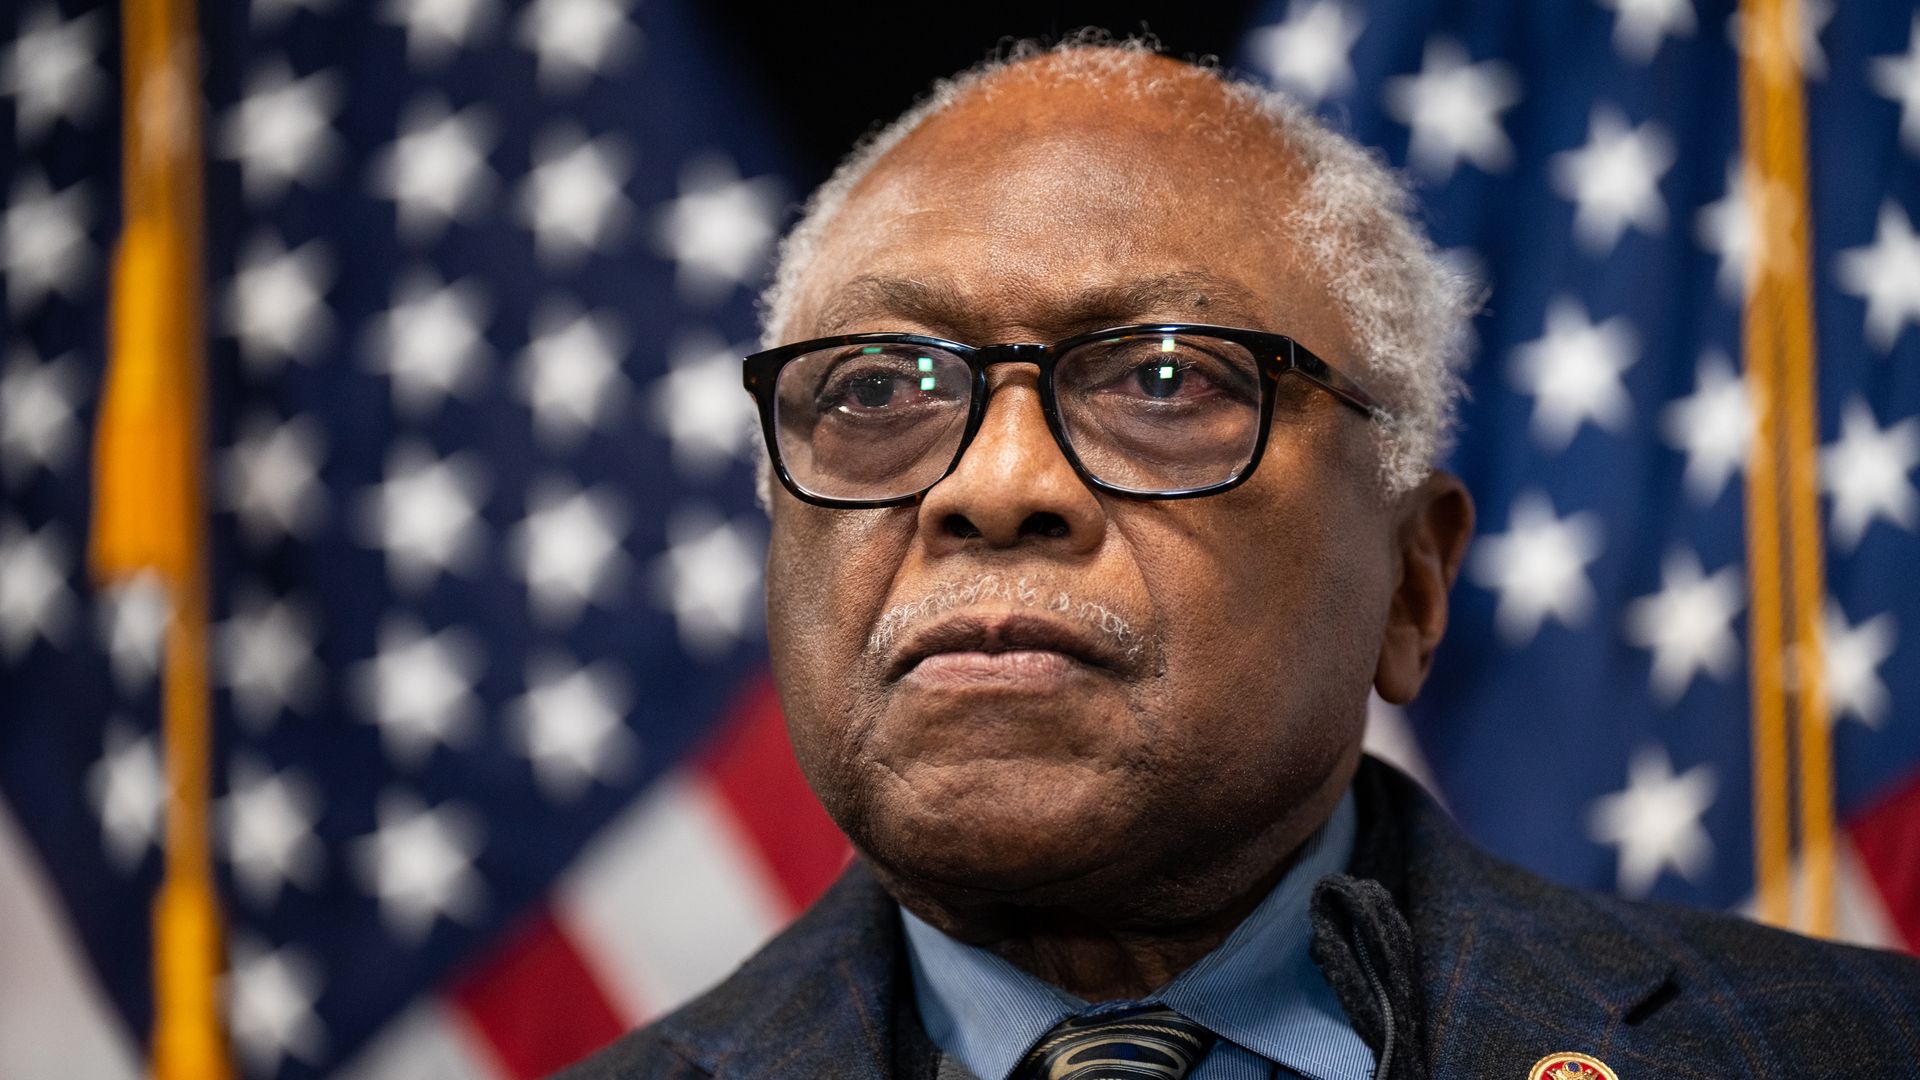 Rep. Jim Clyburn, wearing a dark blue suit, blue shirt and glasses, standing in front of American flags.